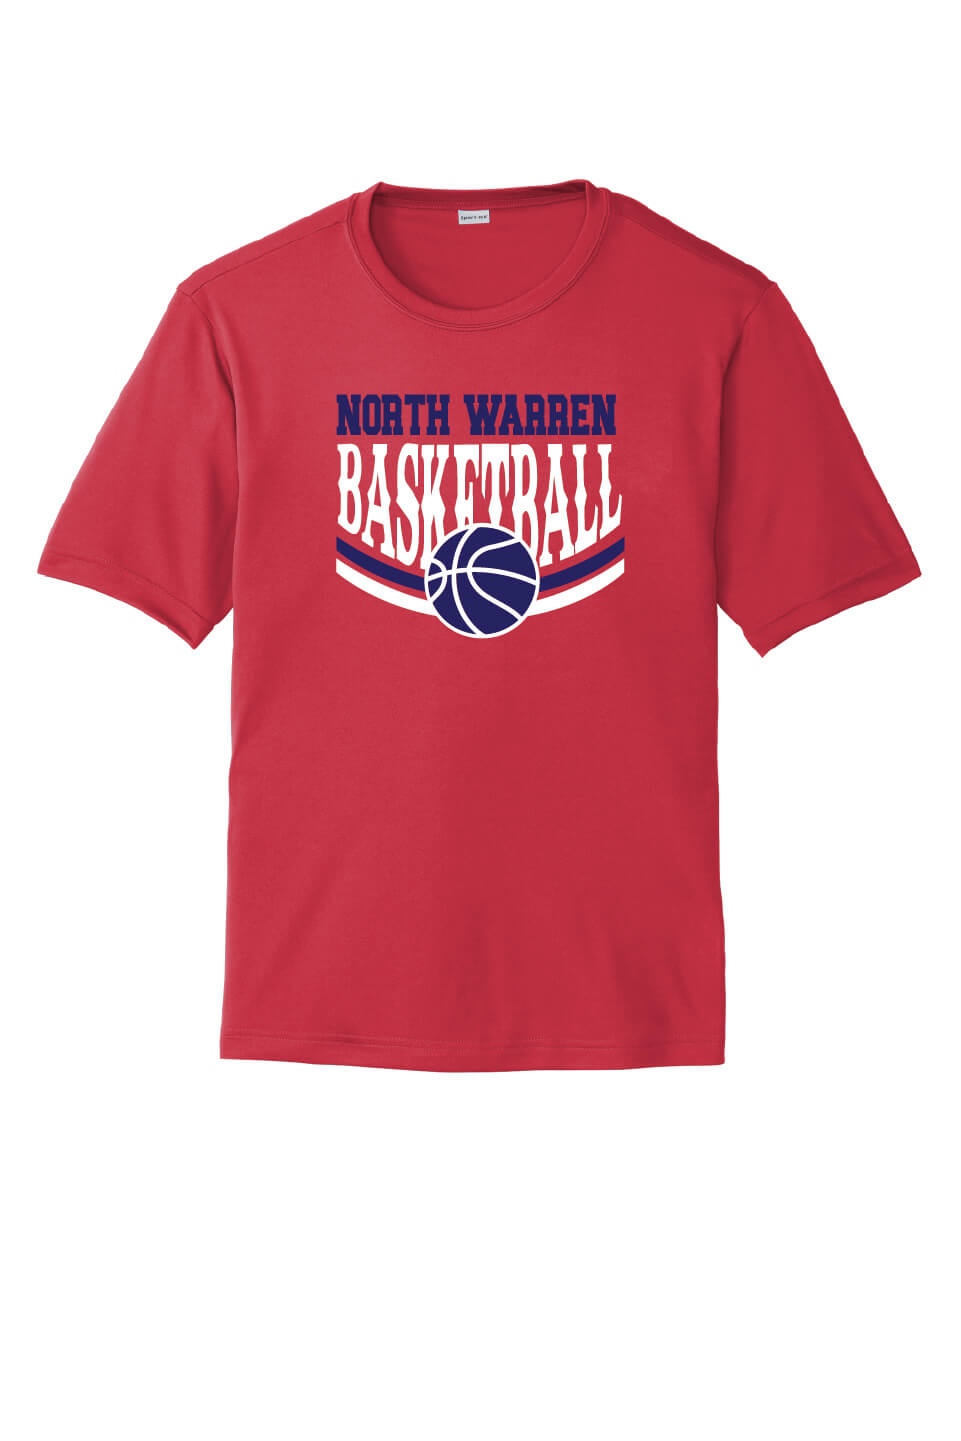 NW Basketball Sport Tek Competitor Short Sleeve Tee red